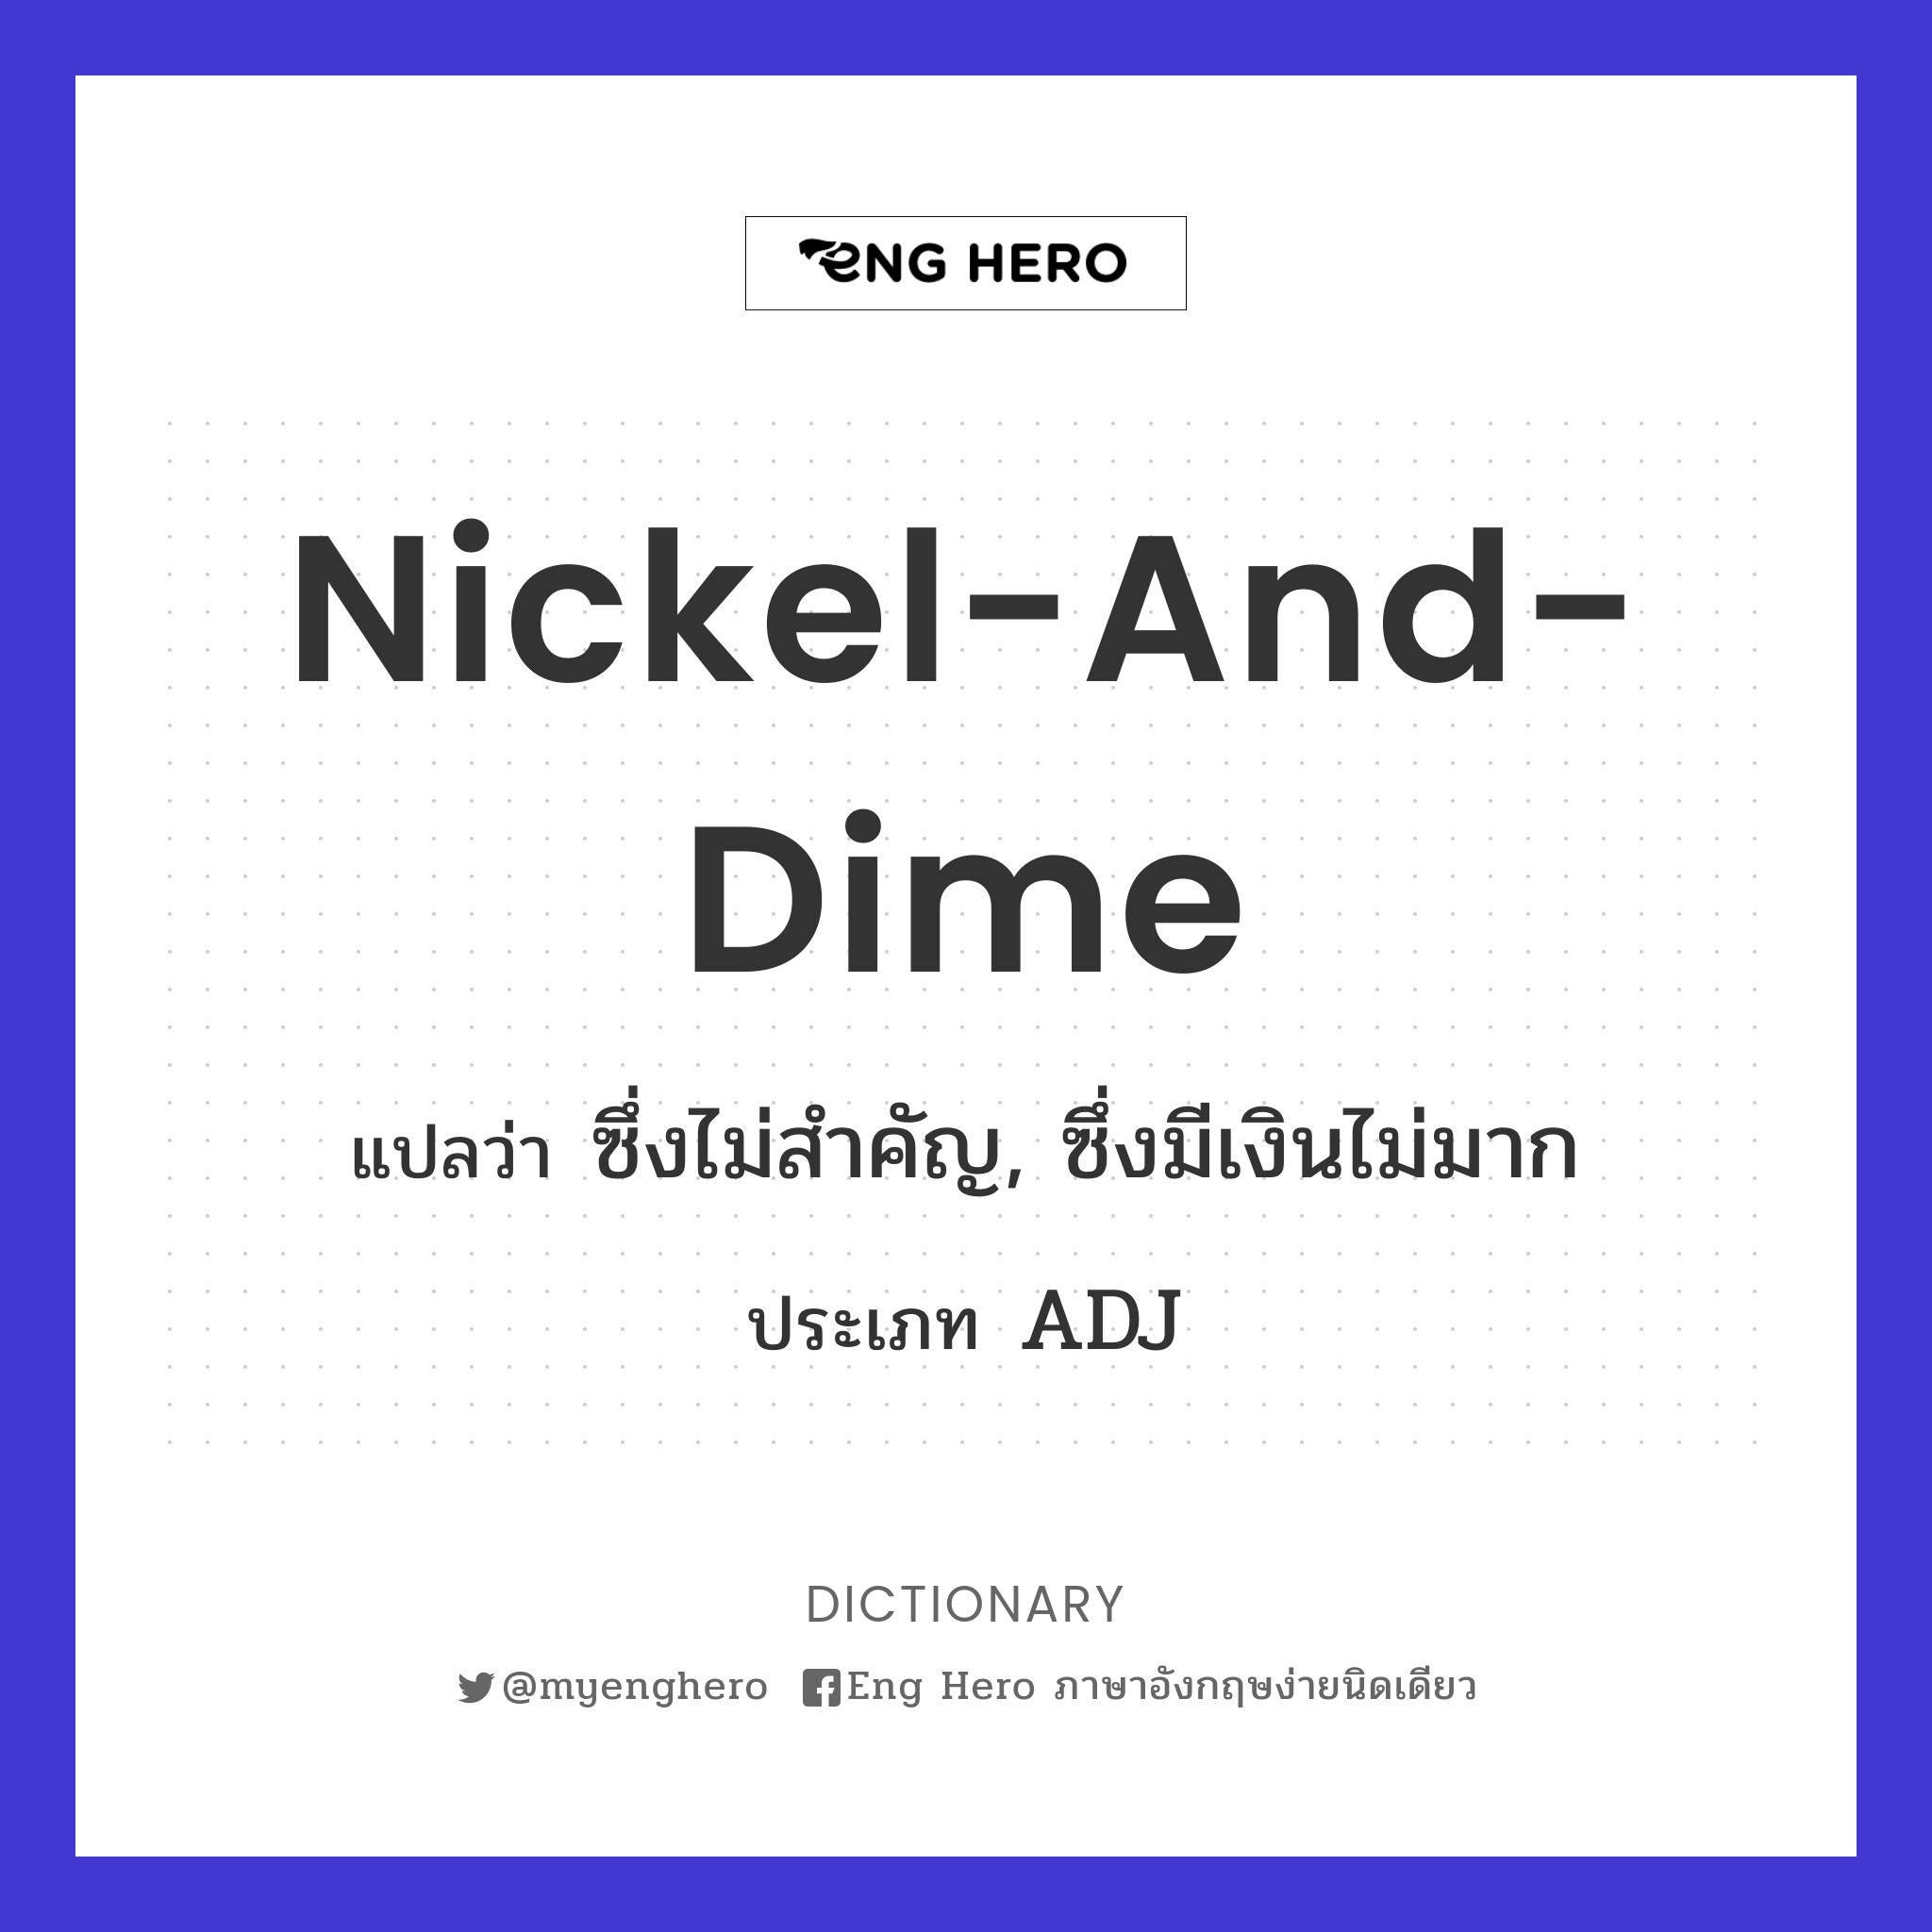 nickel-and-dime